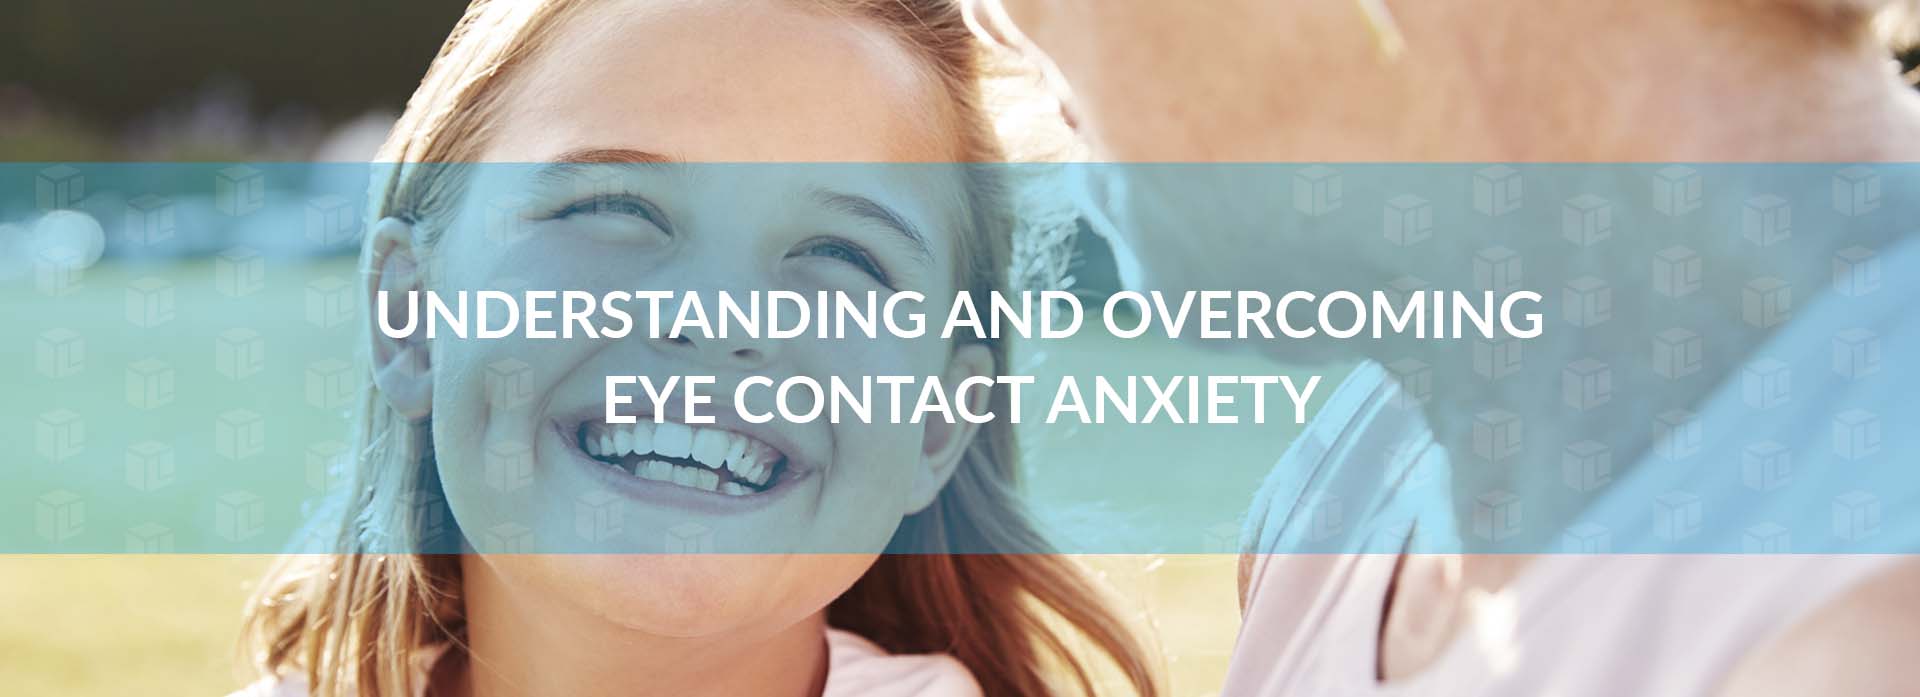 Understanding And Overcoming Eye Contact Anxiety Lexington Services 